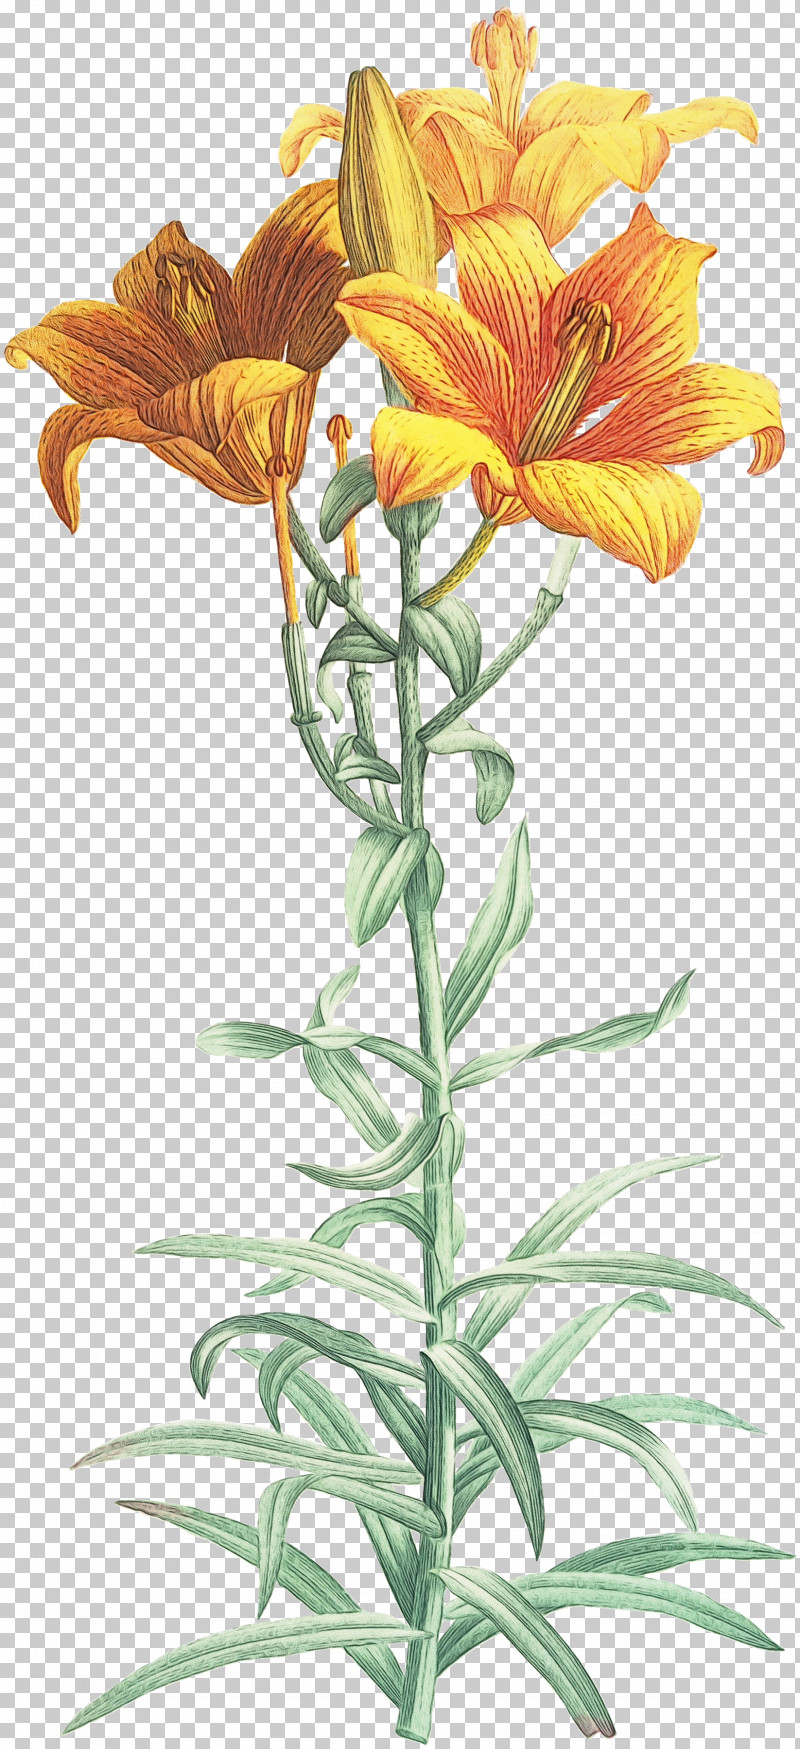 Drawing Orange Lily Painting Flower Line Art PNG, Clipart, Drawing, Flower, Lily, Line Art, Orange Lily Free PNG Download